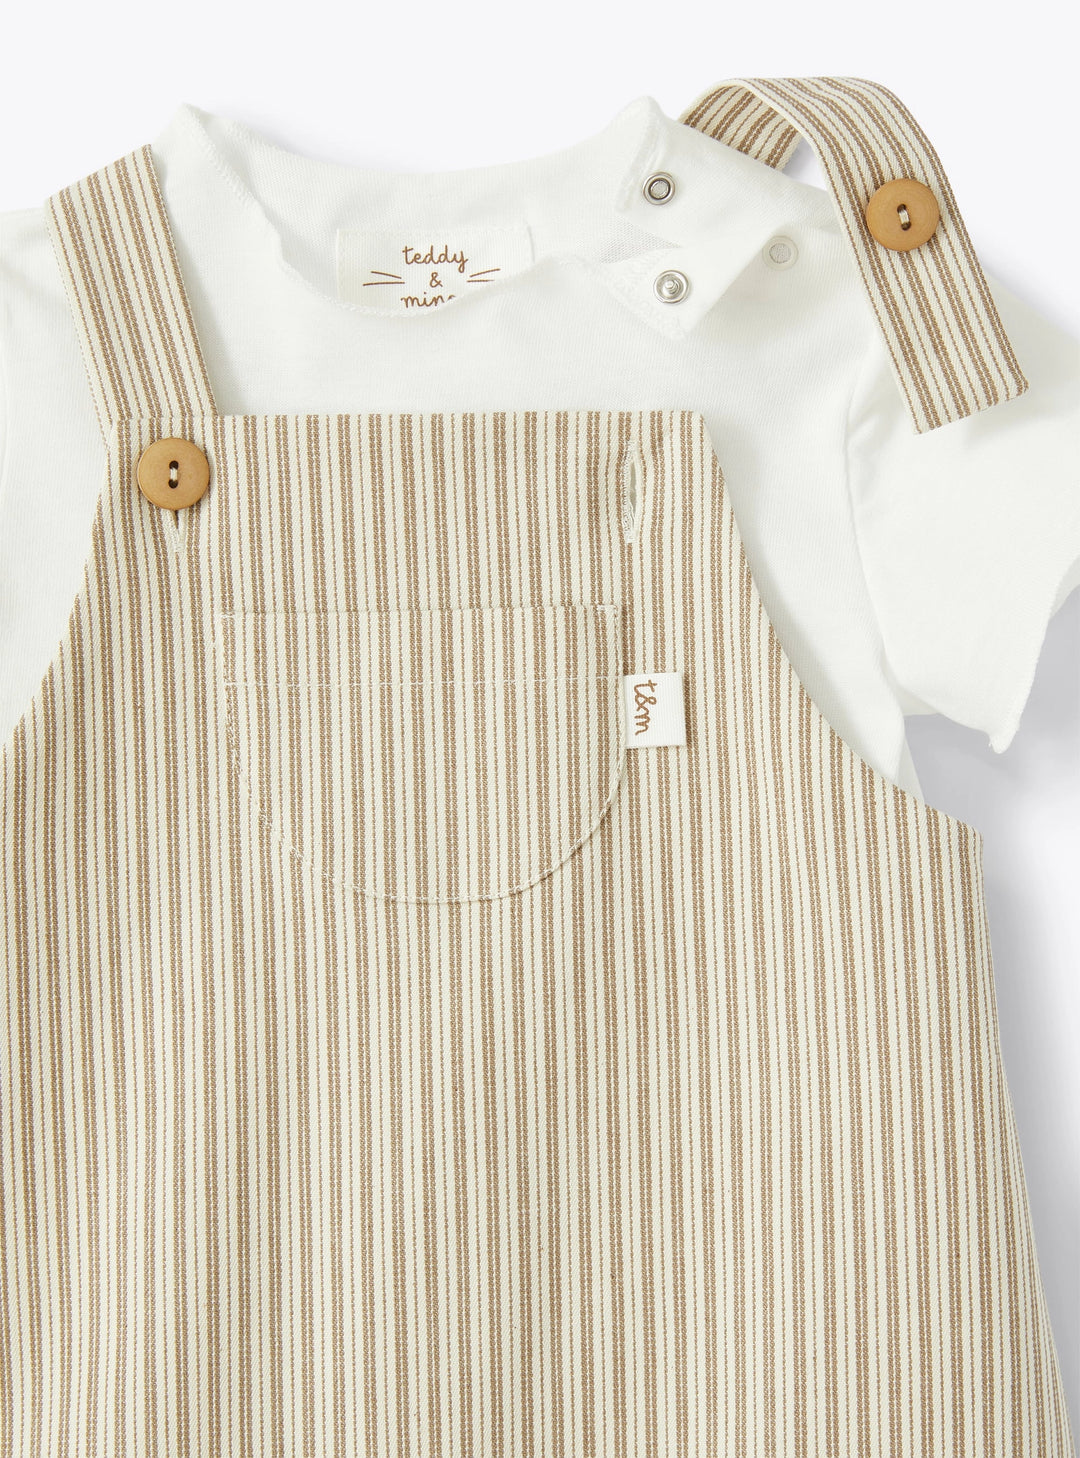 IL GUFO Two-piece set with striped dungarees